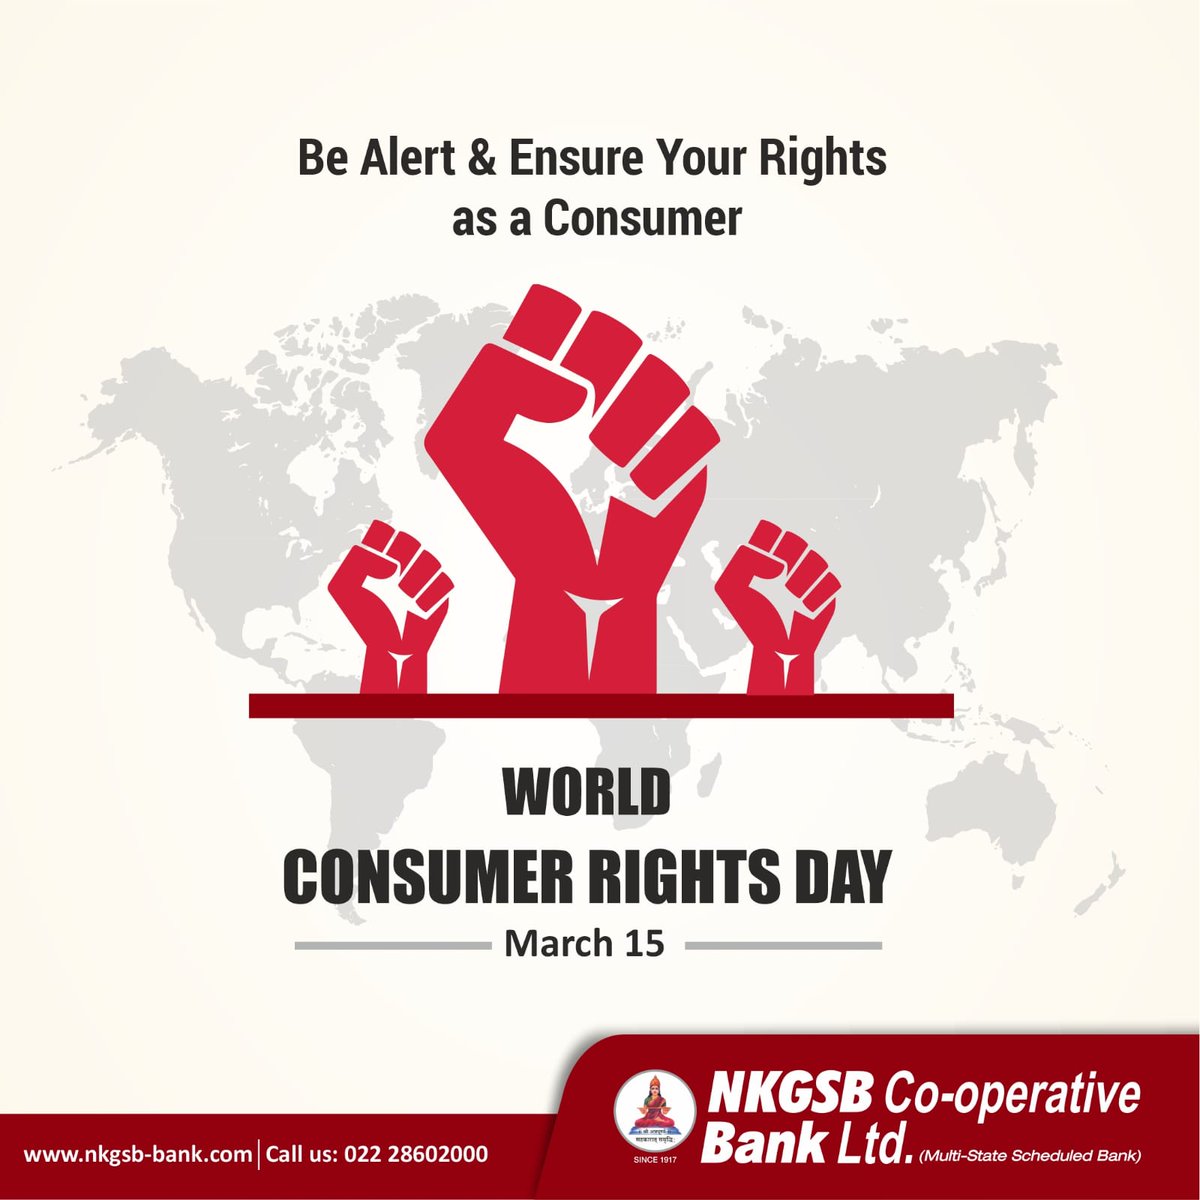 Empower yourself this World Consumer Rights Day: Stay vigilant and safeguard your rights as a consumer. 

#NKGSB #WorldConsumerRightsDay #CyberSecurity #Banking #Finance #CarLoan #EasyLoans #HomeLoan #EducationLoan #NetBanking #DigitalBanking #InternetBanking